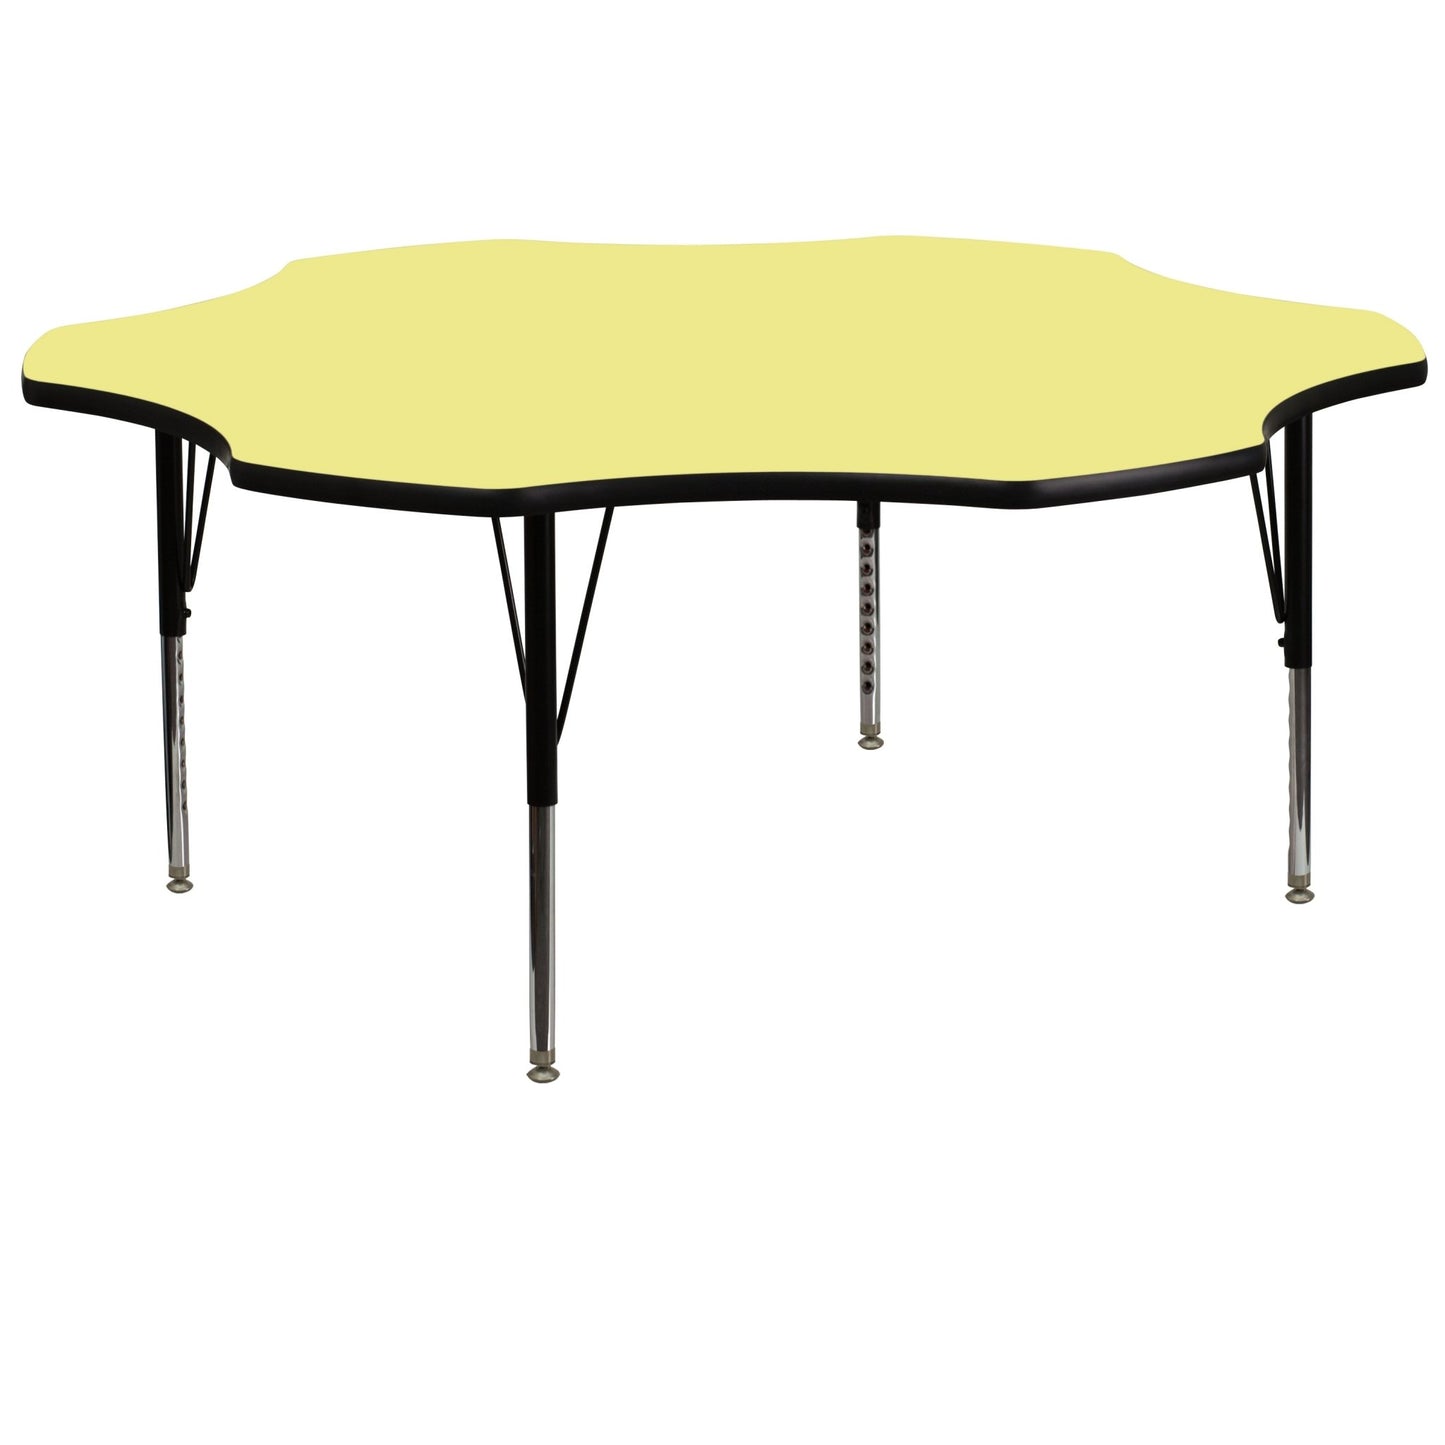 Wren Mobile 60'' Flower Thermal Laminate Activity Table - Height Adjustable Legs - XU-A60-FLR - SchoolOutlet